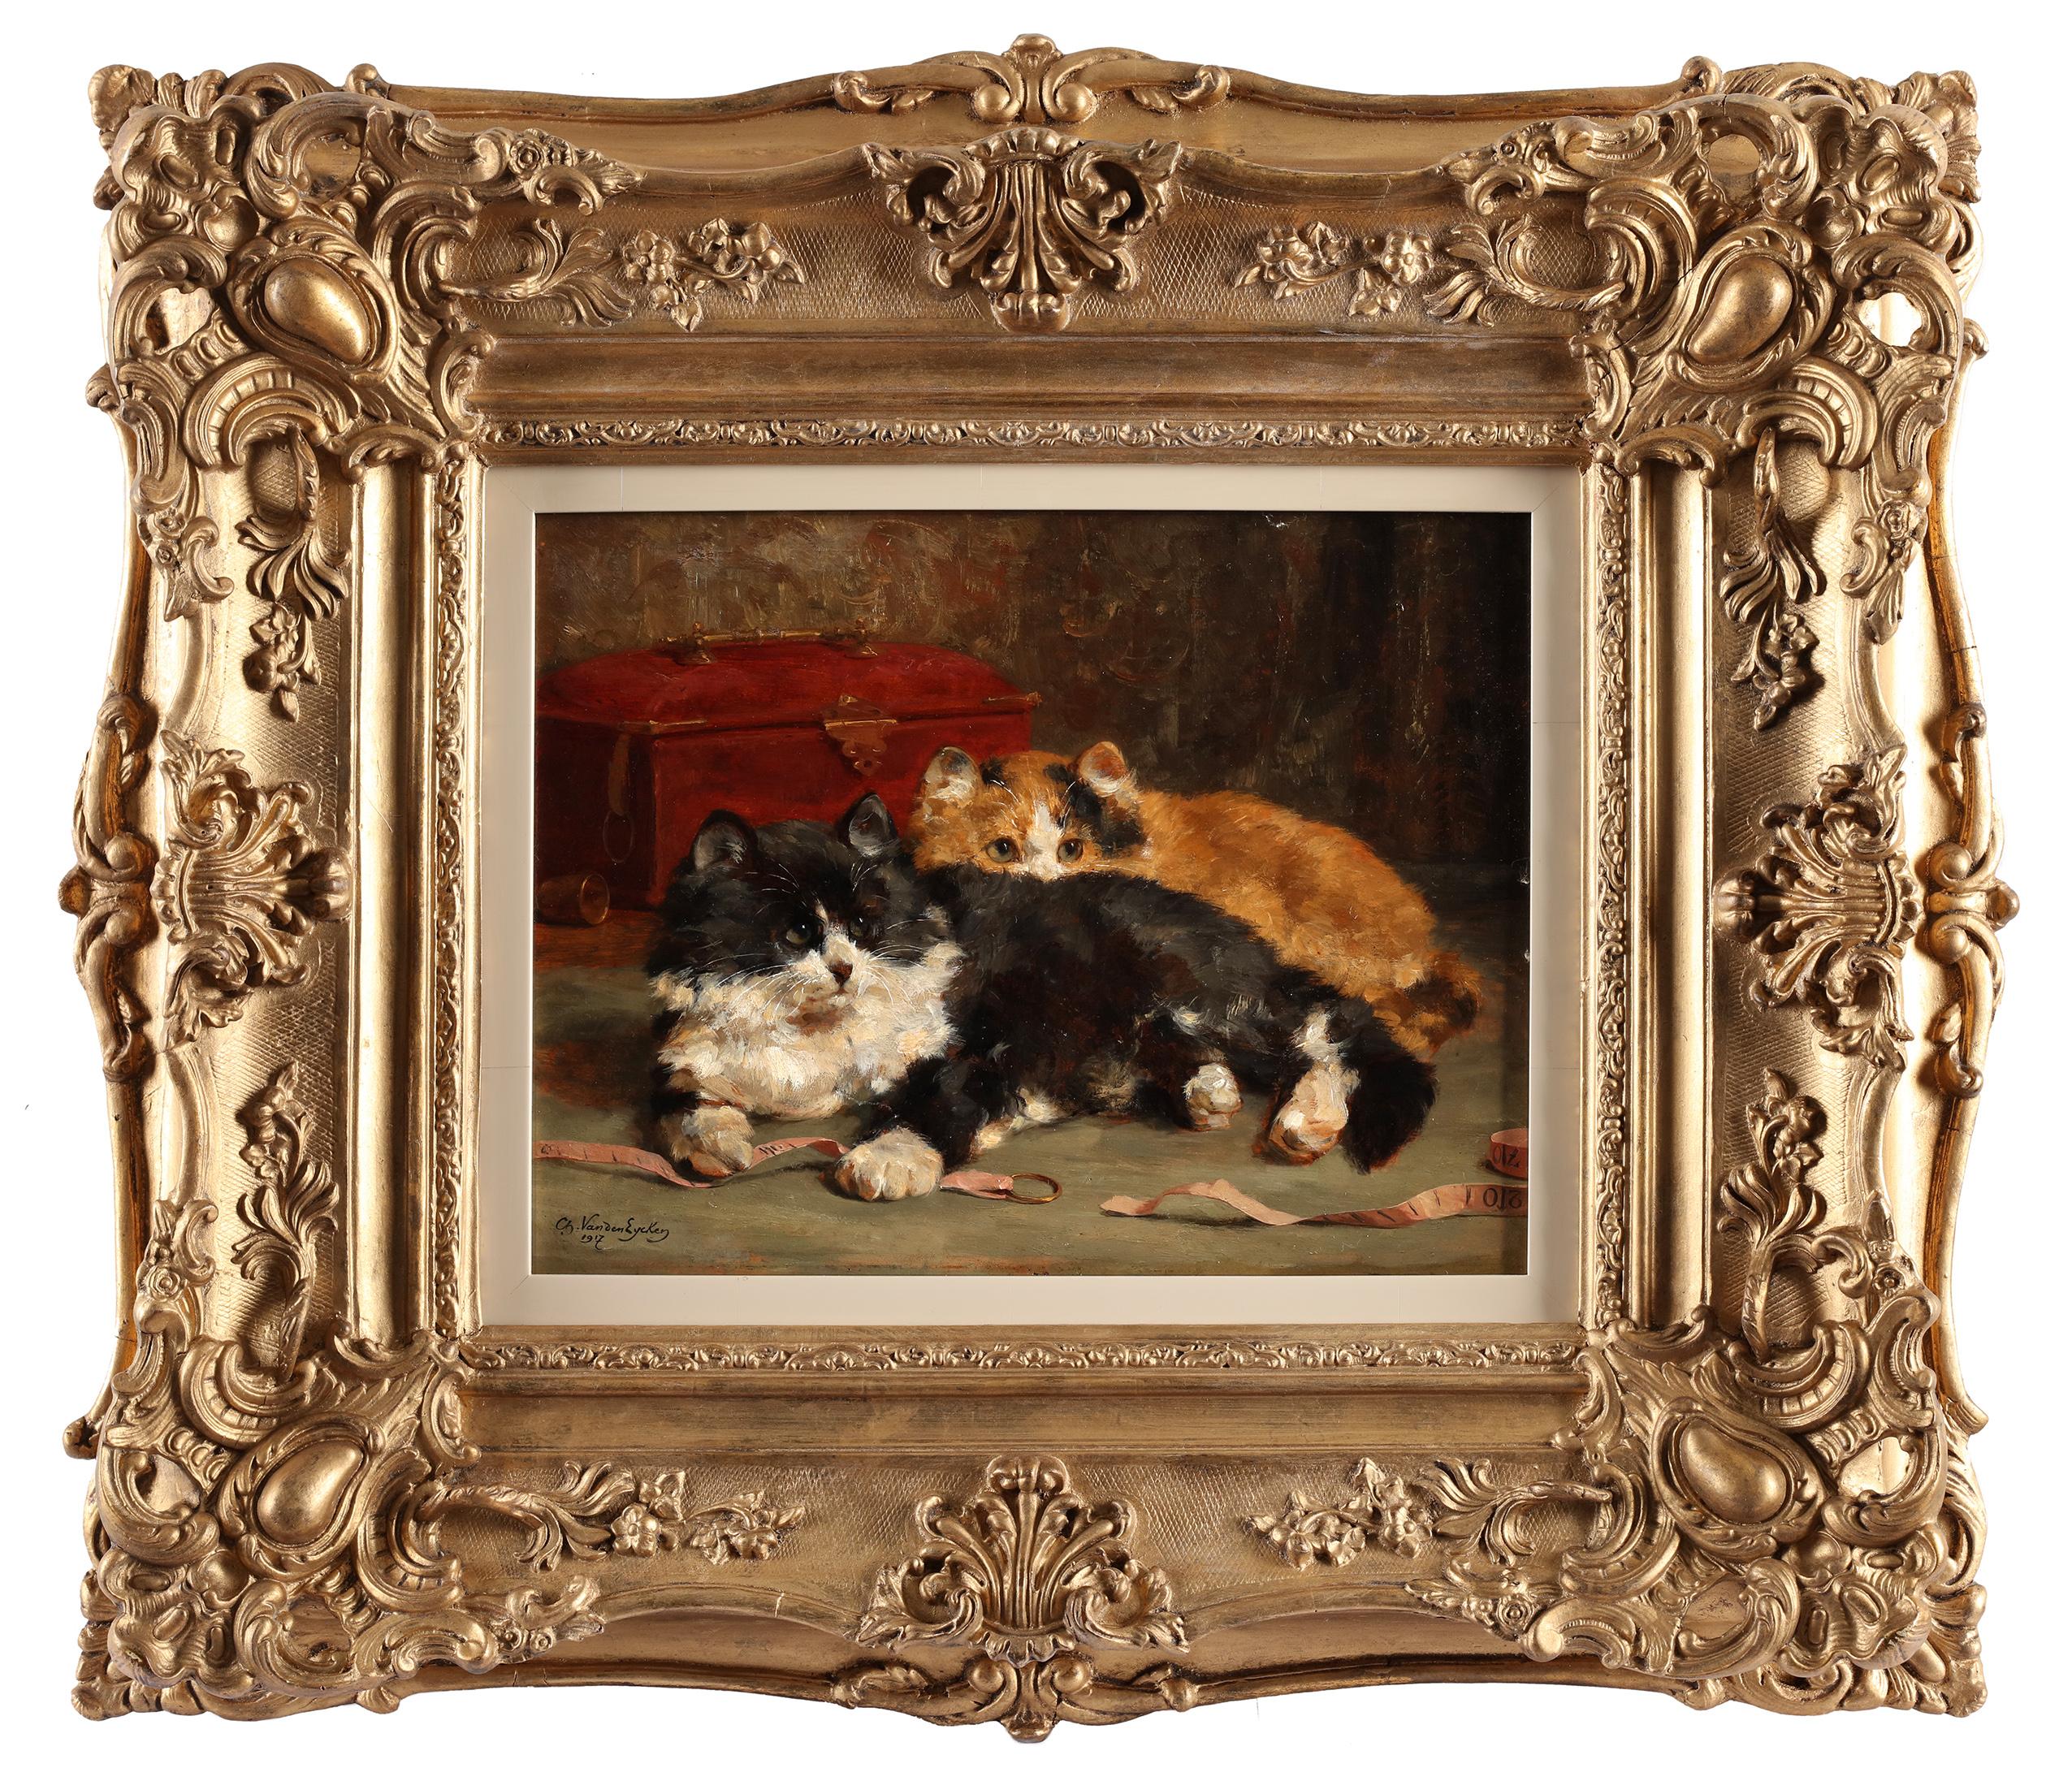 Two cats playing with a measuring tape- Charles Van den Eycken (1859 -1923) - Painting by Charles Van Den Eycken